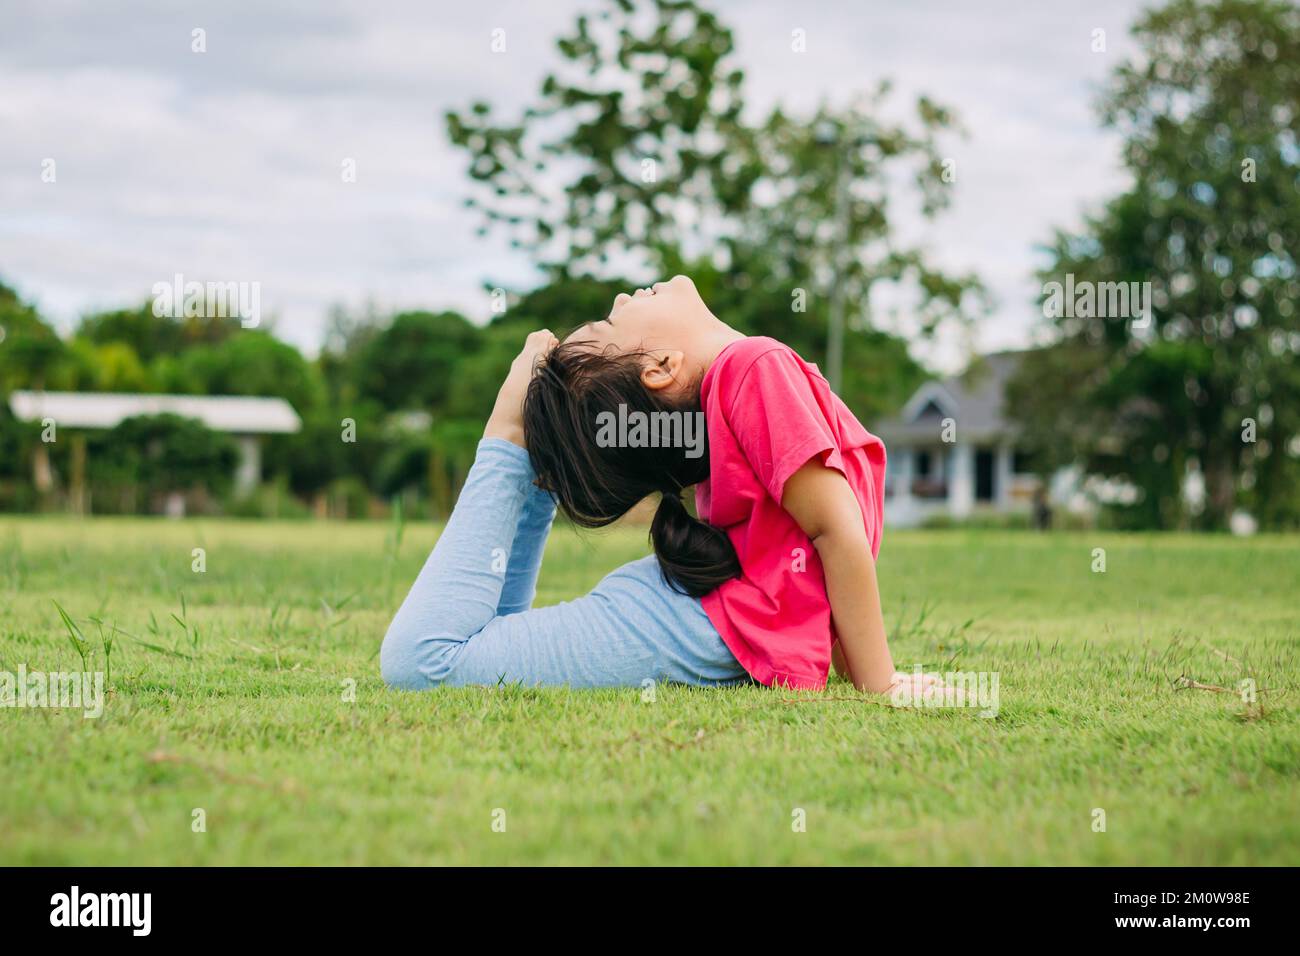 Children meditation with yoga pose on green grass field. Outdoors activity for kids to practicing yoga, children can learn how to exercise. Stock Photo